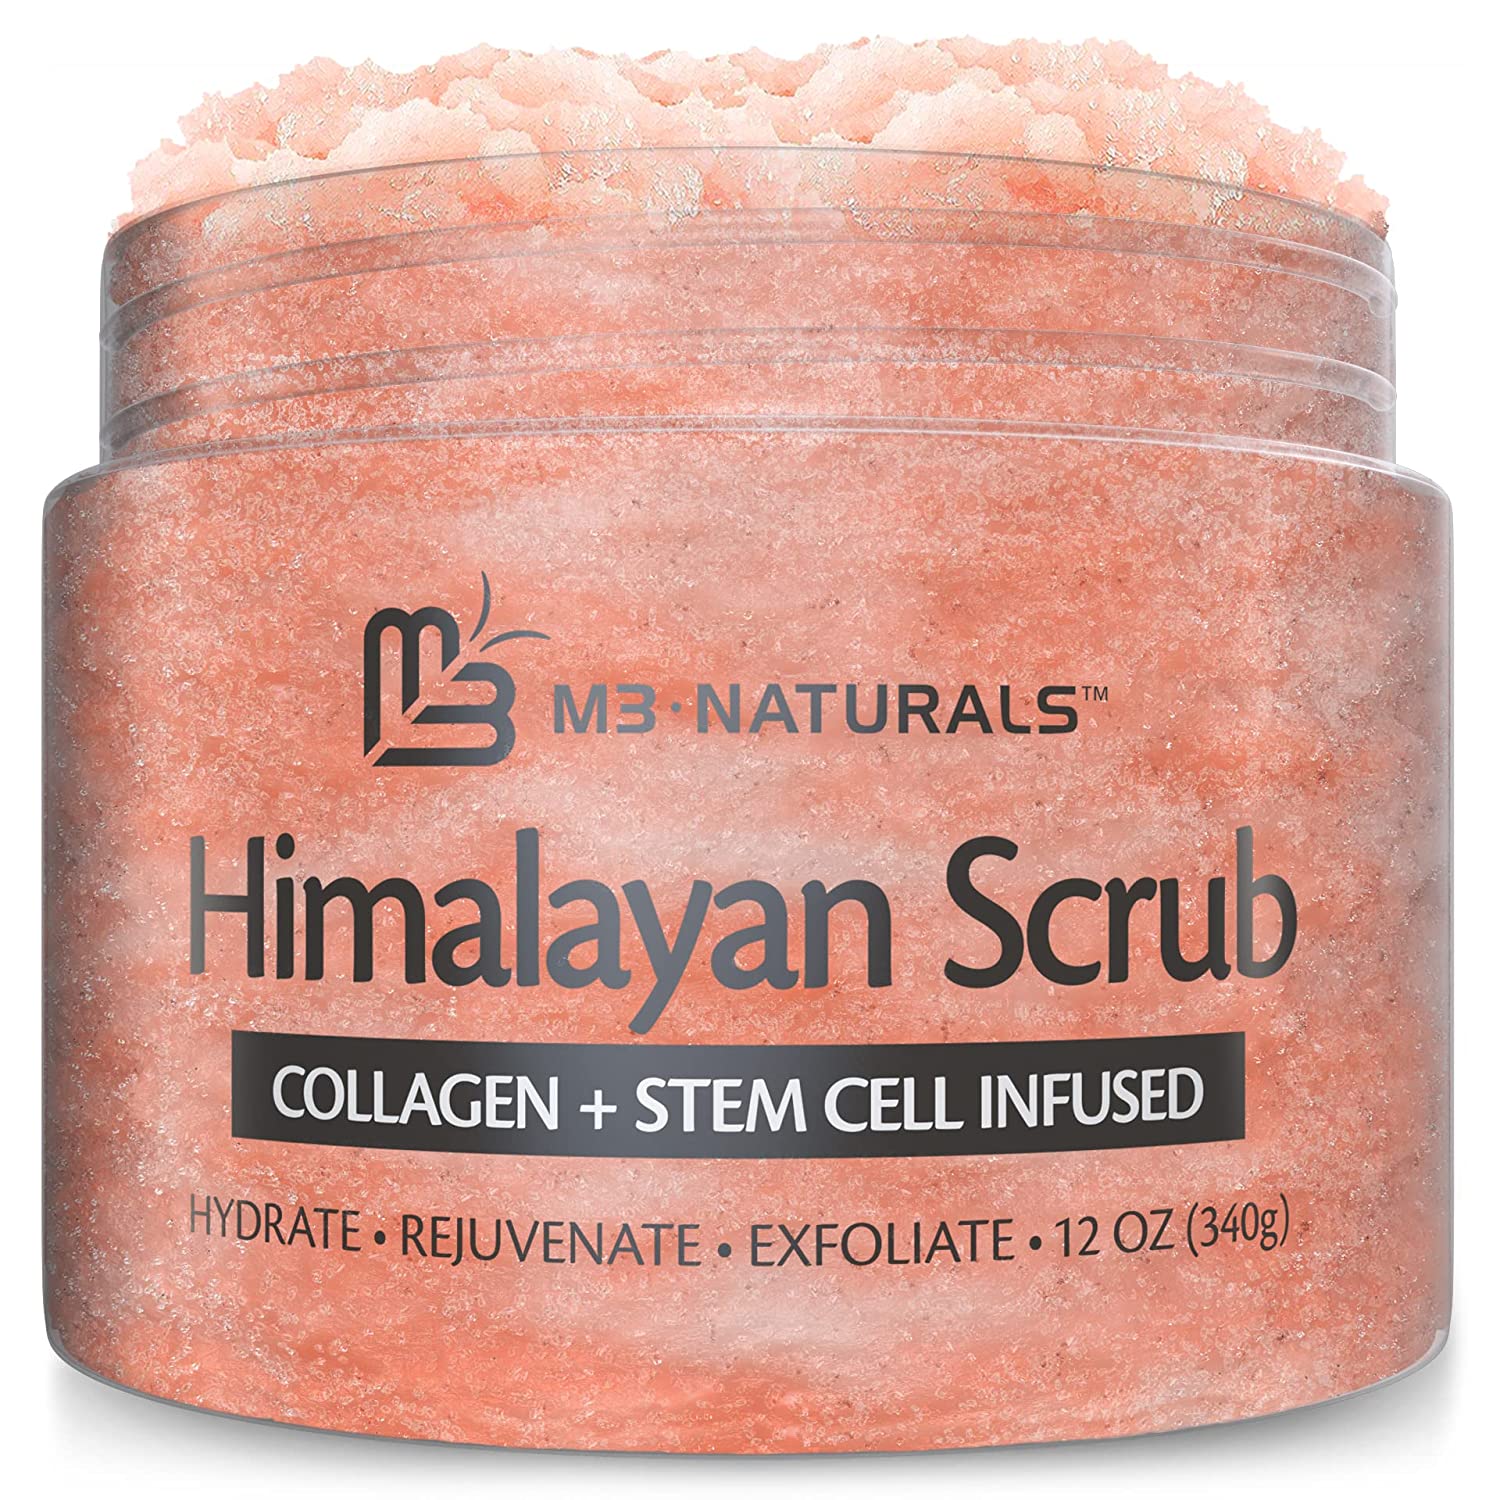 M3 Naturals Himalayan Salt Body Scrub Infused with Collagen and Stem Cell | Beauty Stocking Stuffers | Amazon Stocking Stuffers | Stocking stuffers For Adults | stocking stuffers for men | mens stocking stuffers | Stocking stuffers for her | Stocking stuffers for guys | Cheap stocking stuffers | Best stocking stuffers | Stocking stuffers for wife | stocking stuffer gifts | Best stocking stuffers